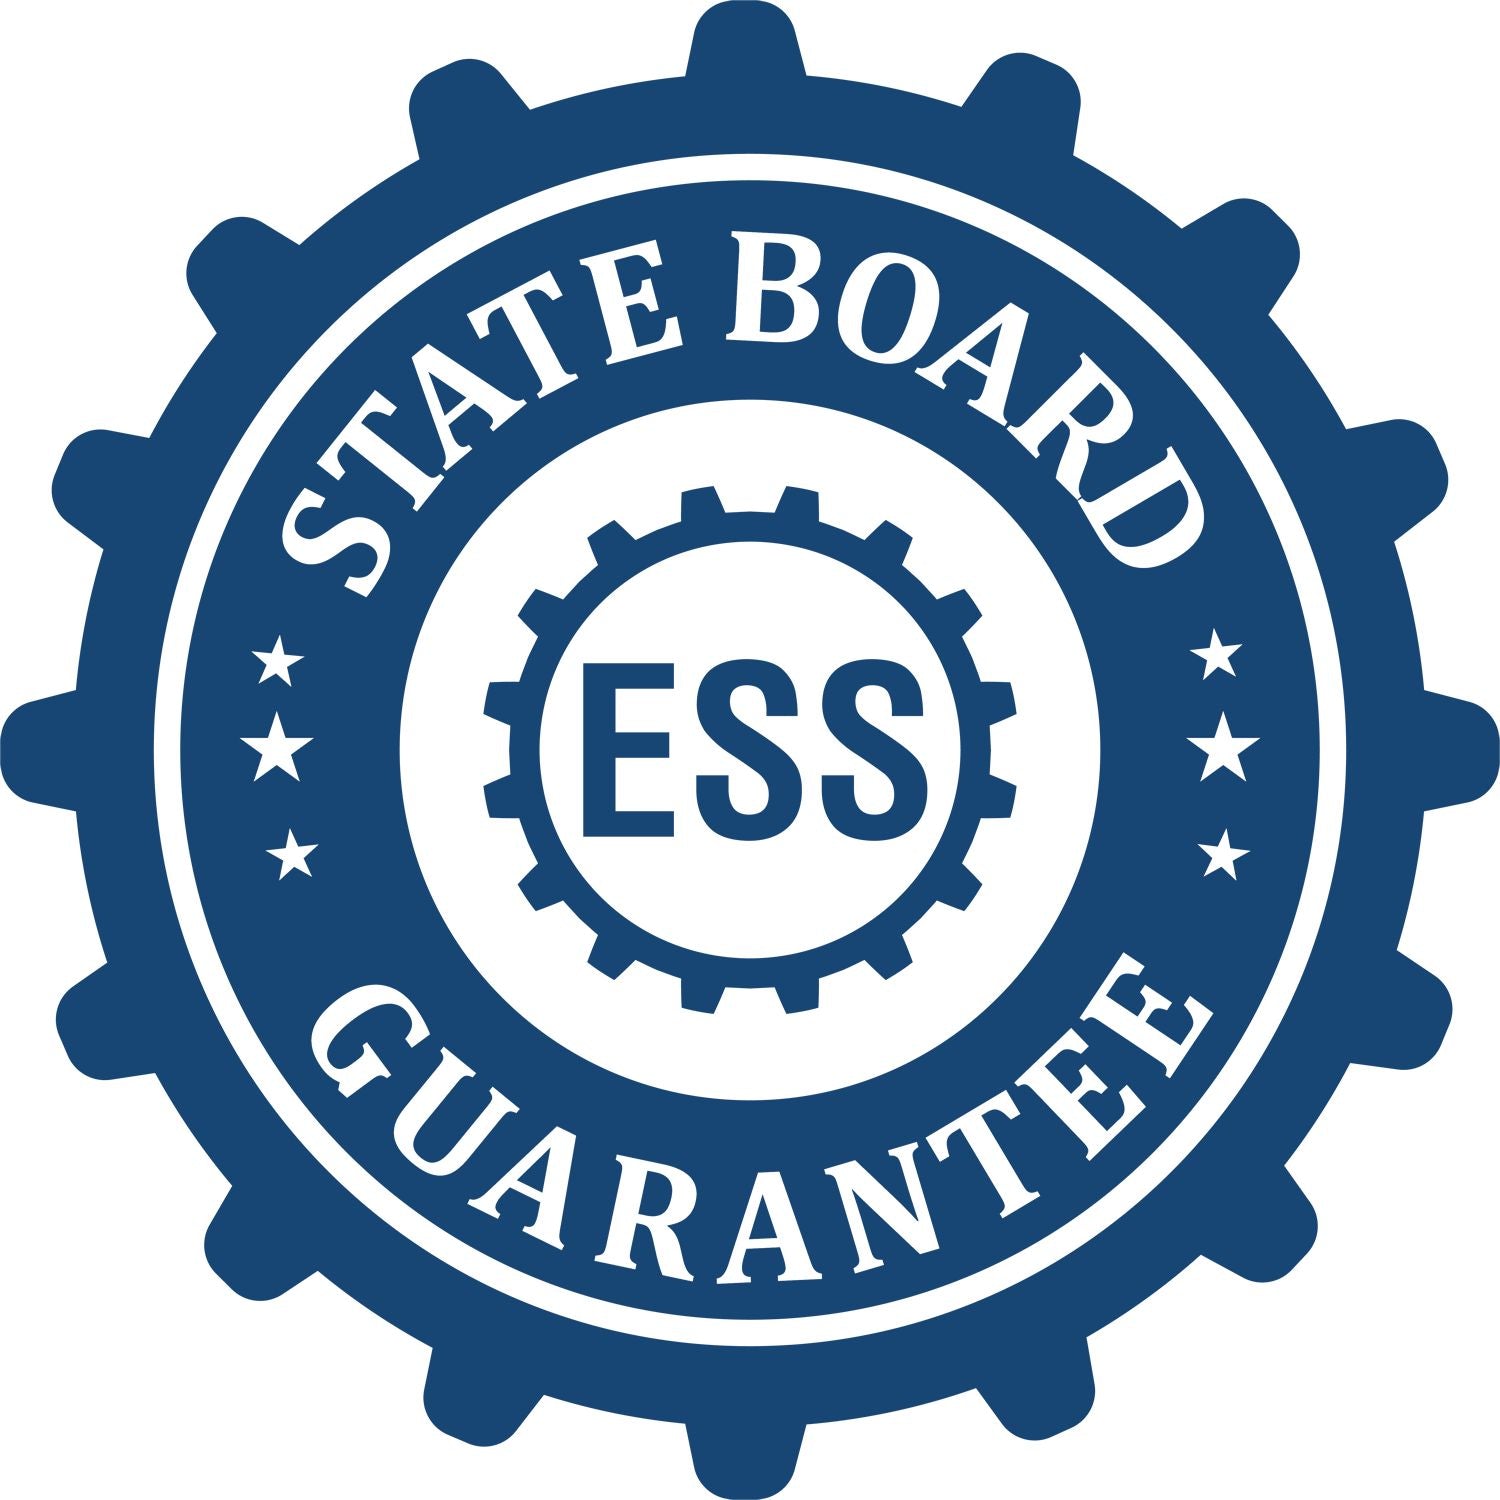 An emblem in a gear shape illustrating a state board guarantee for the Handheld New York Land Surveyor Seal product.